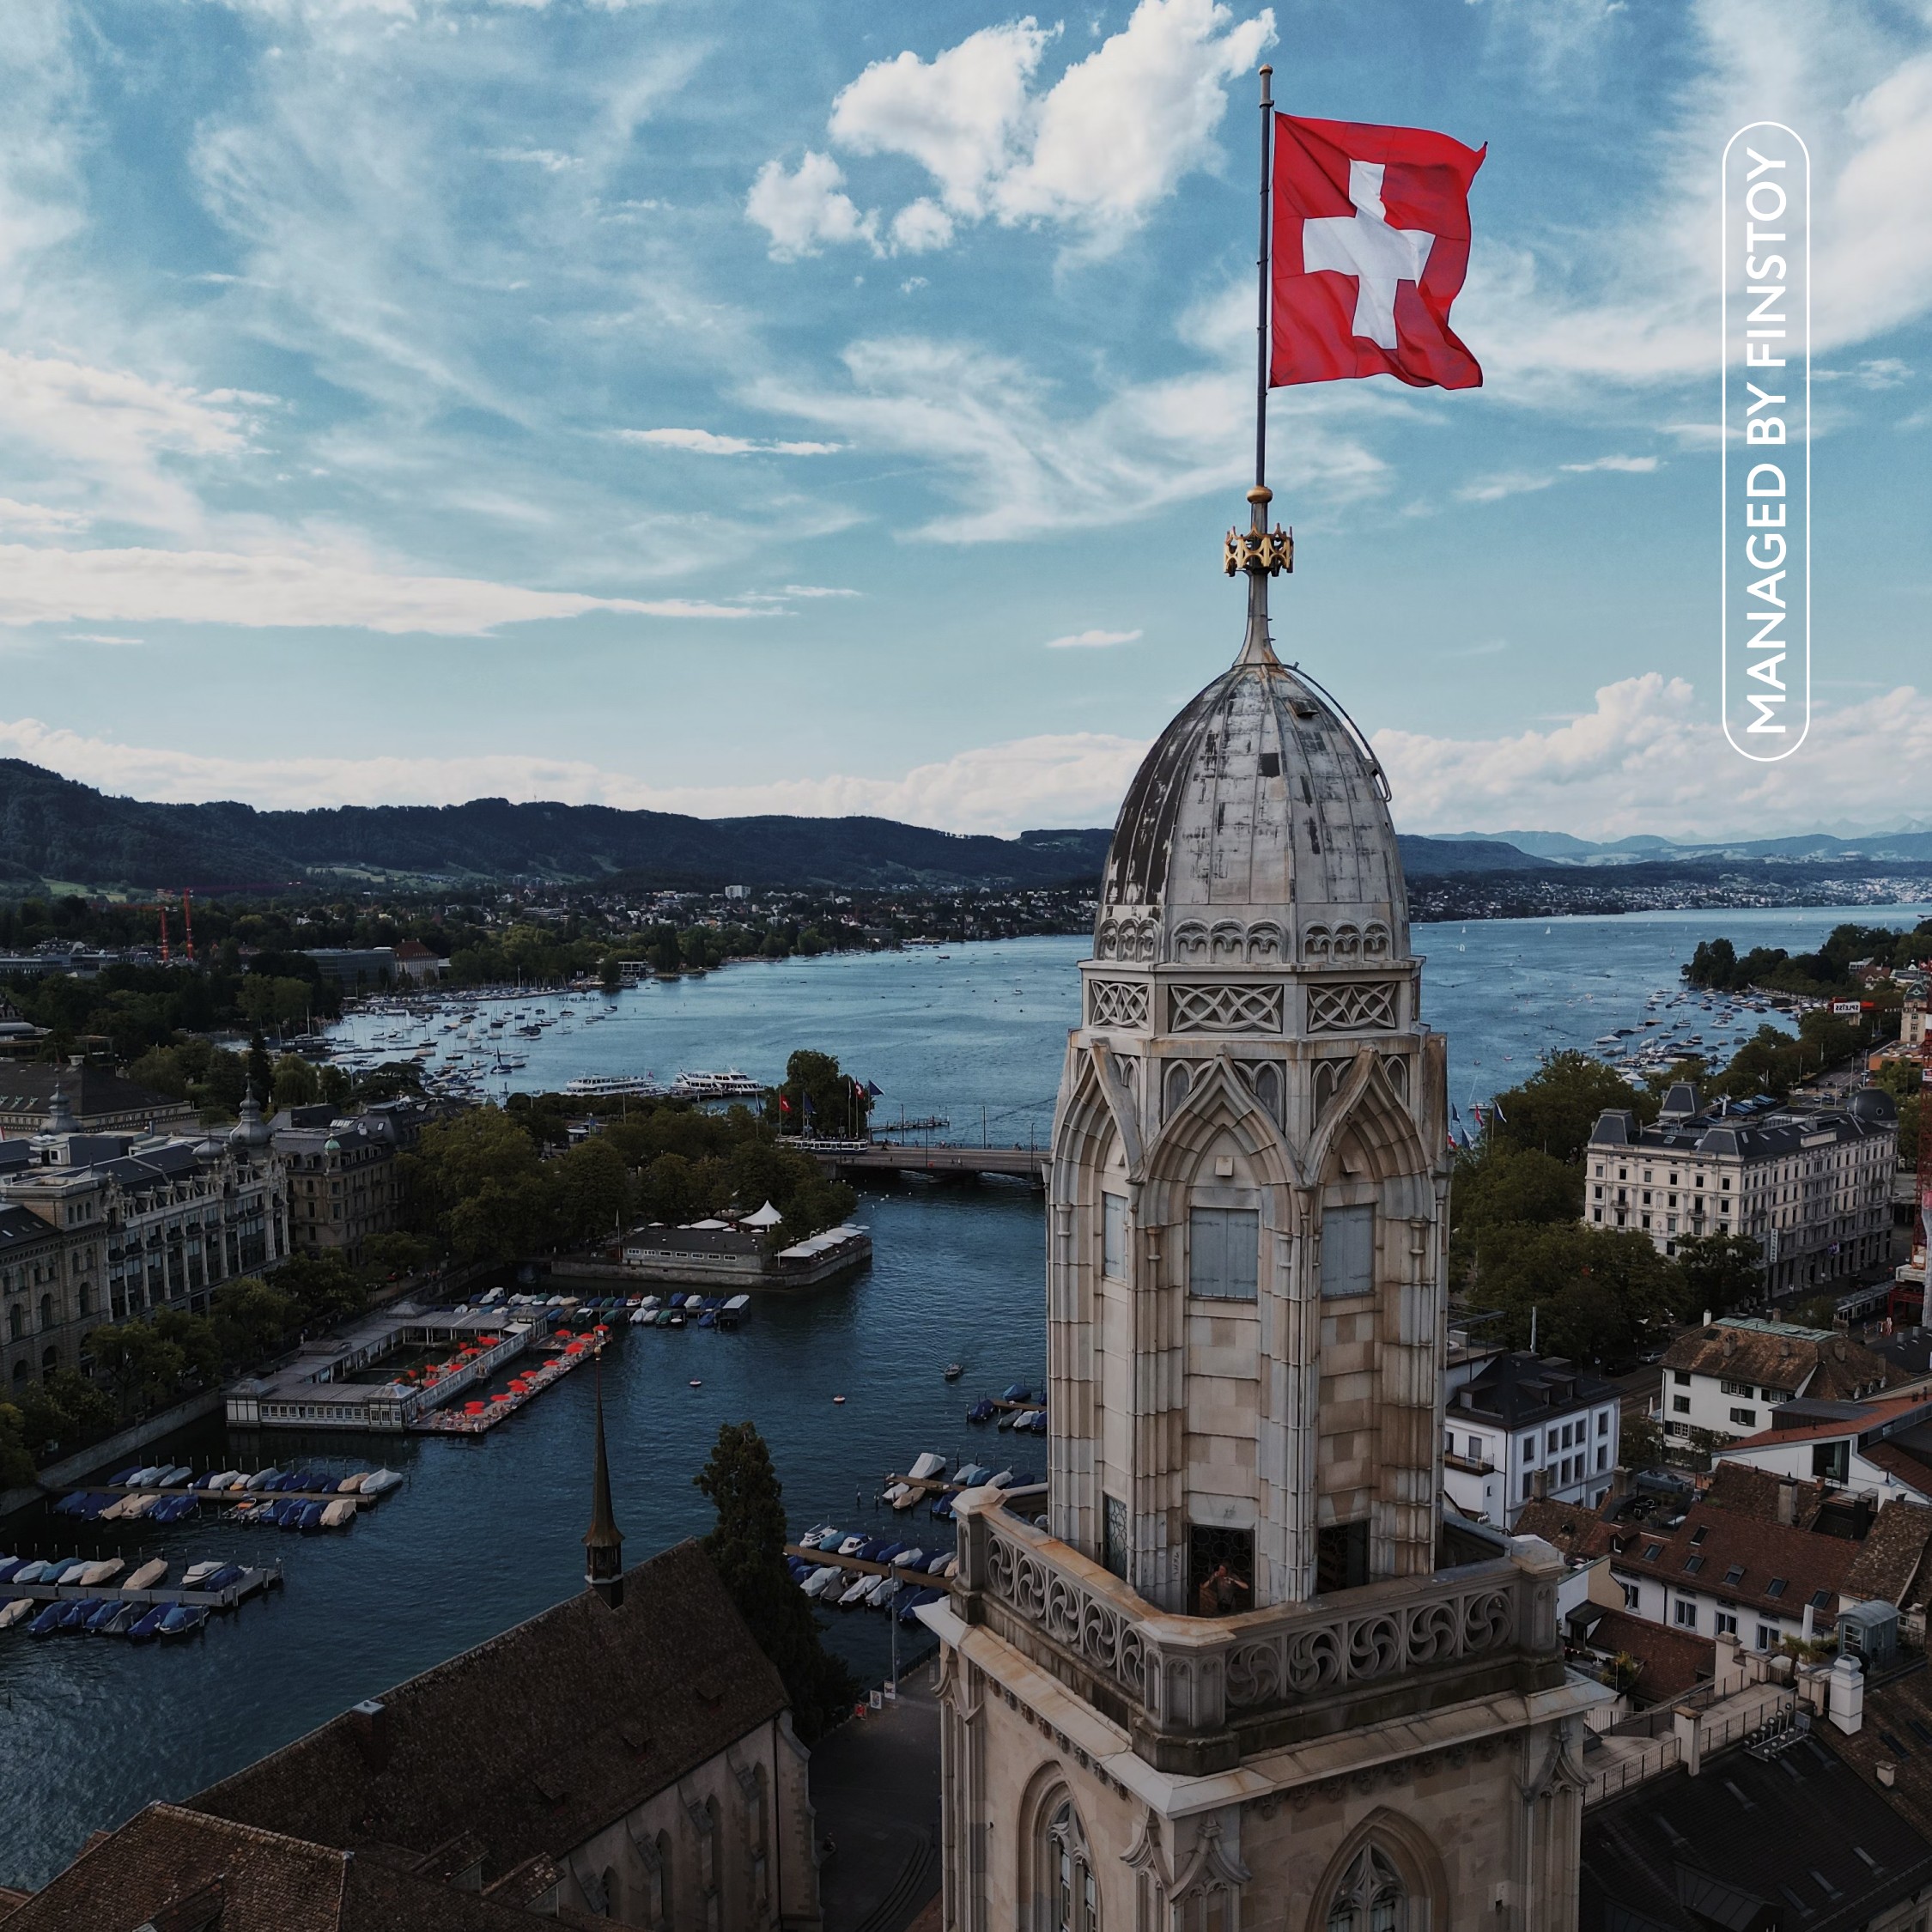 A view of a Swiss lakeside with a beautiful building decorated with a Swiss flag